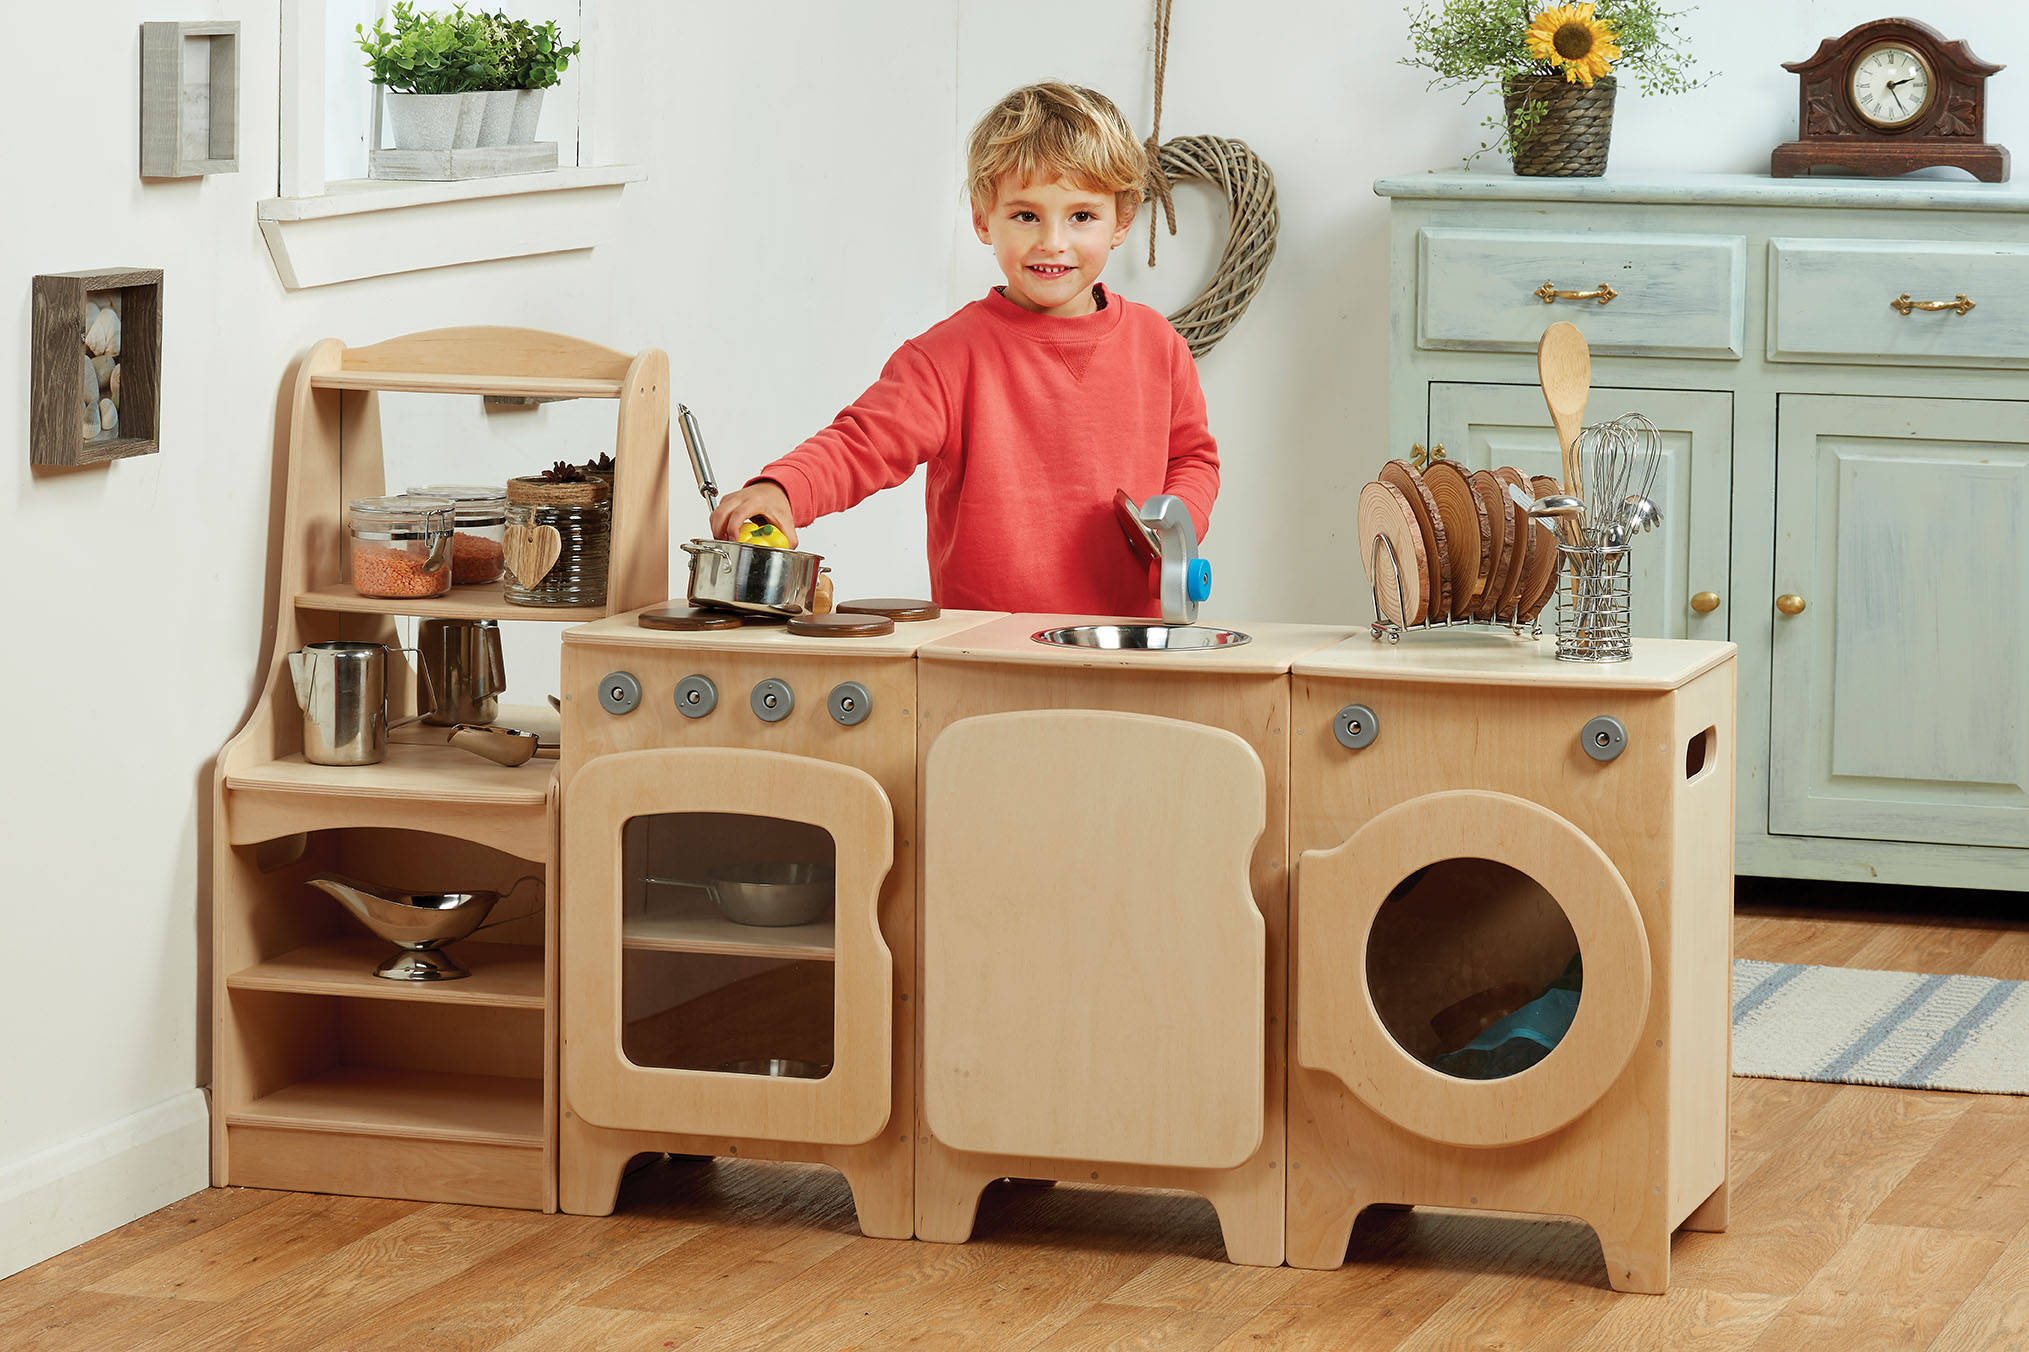 PT987-Millhouse-Early-Years-Furniture-Natural-Kitchen-Set-with-Dresser_Lifestyle_RGB.jpg